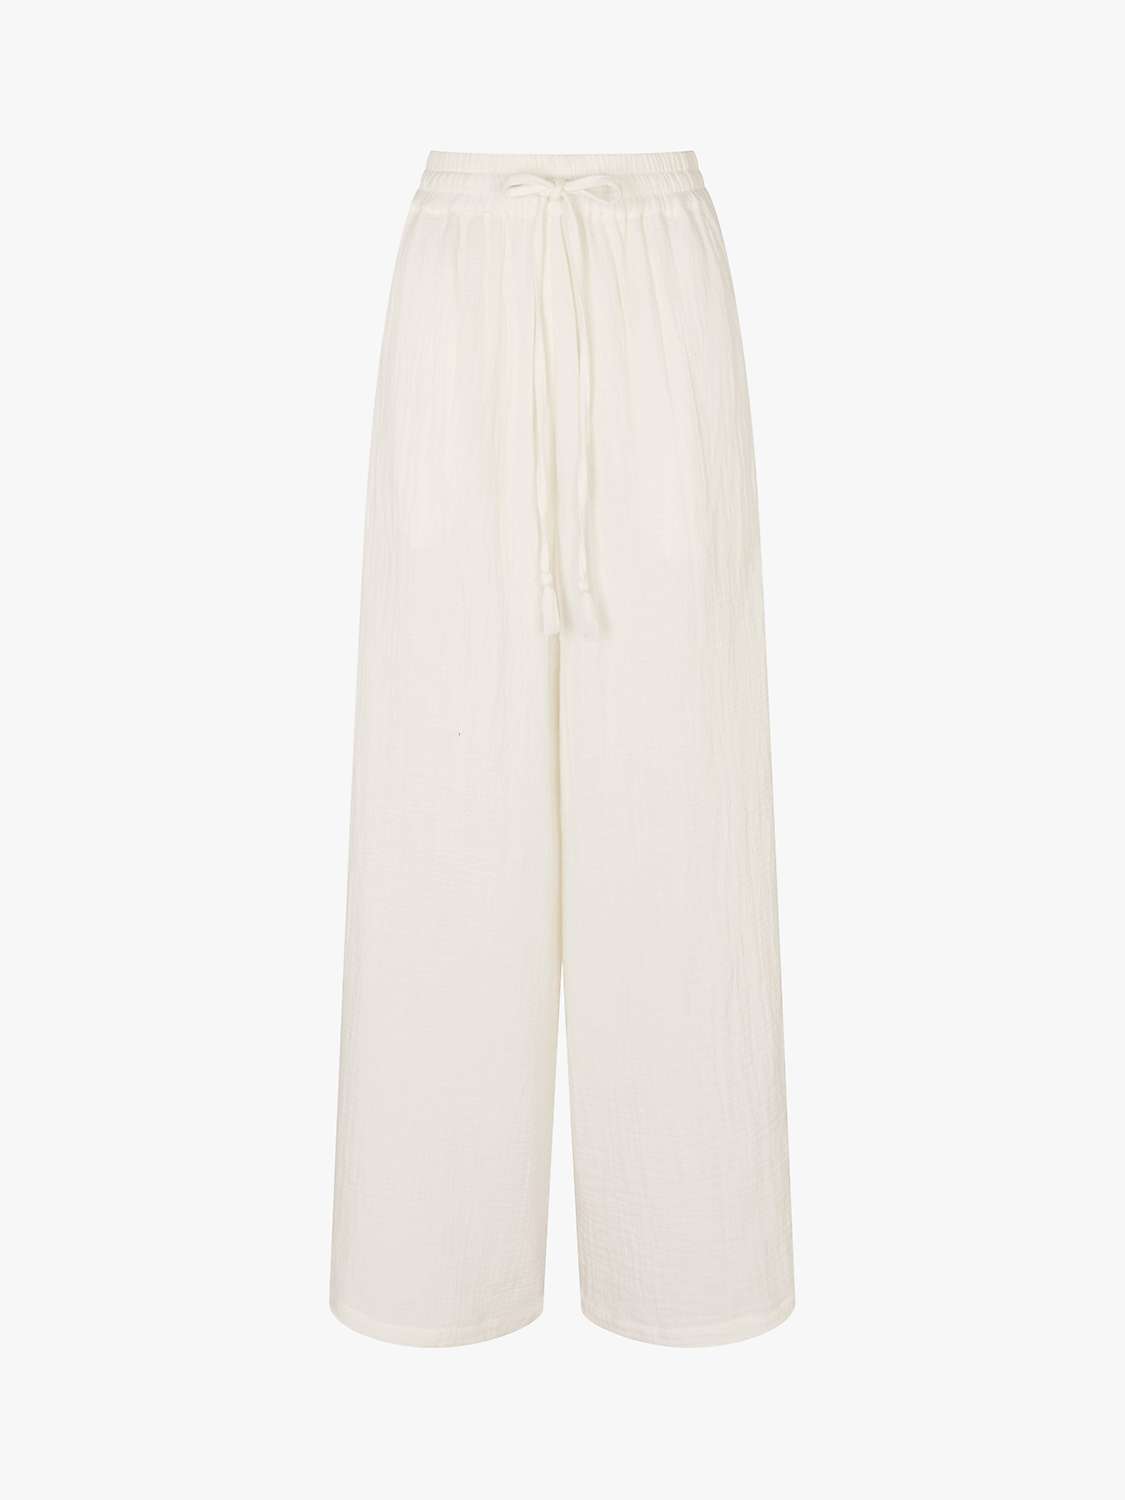 Accessorize Crinkle Cotton Beach Trousers, White at John Lewis & Partners